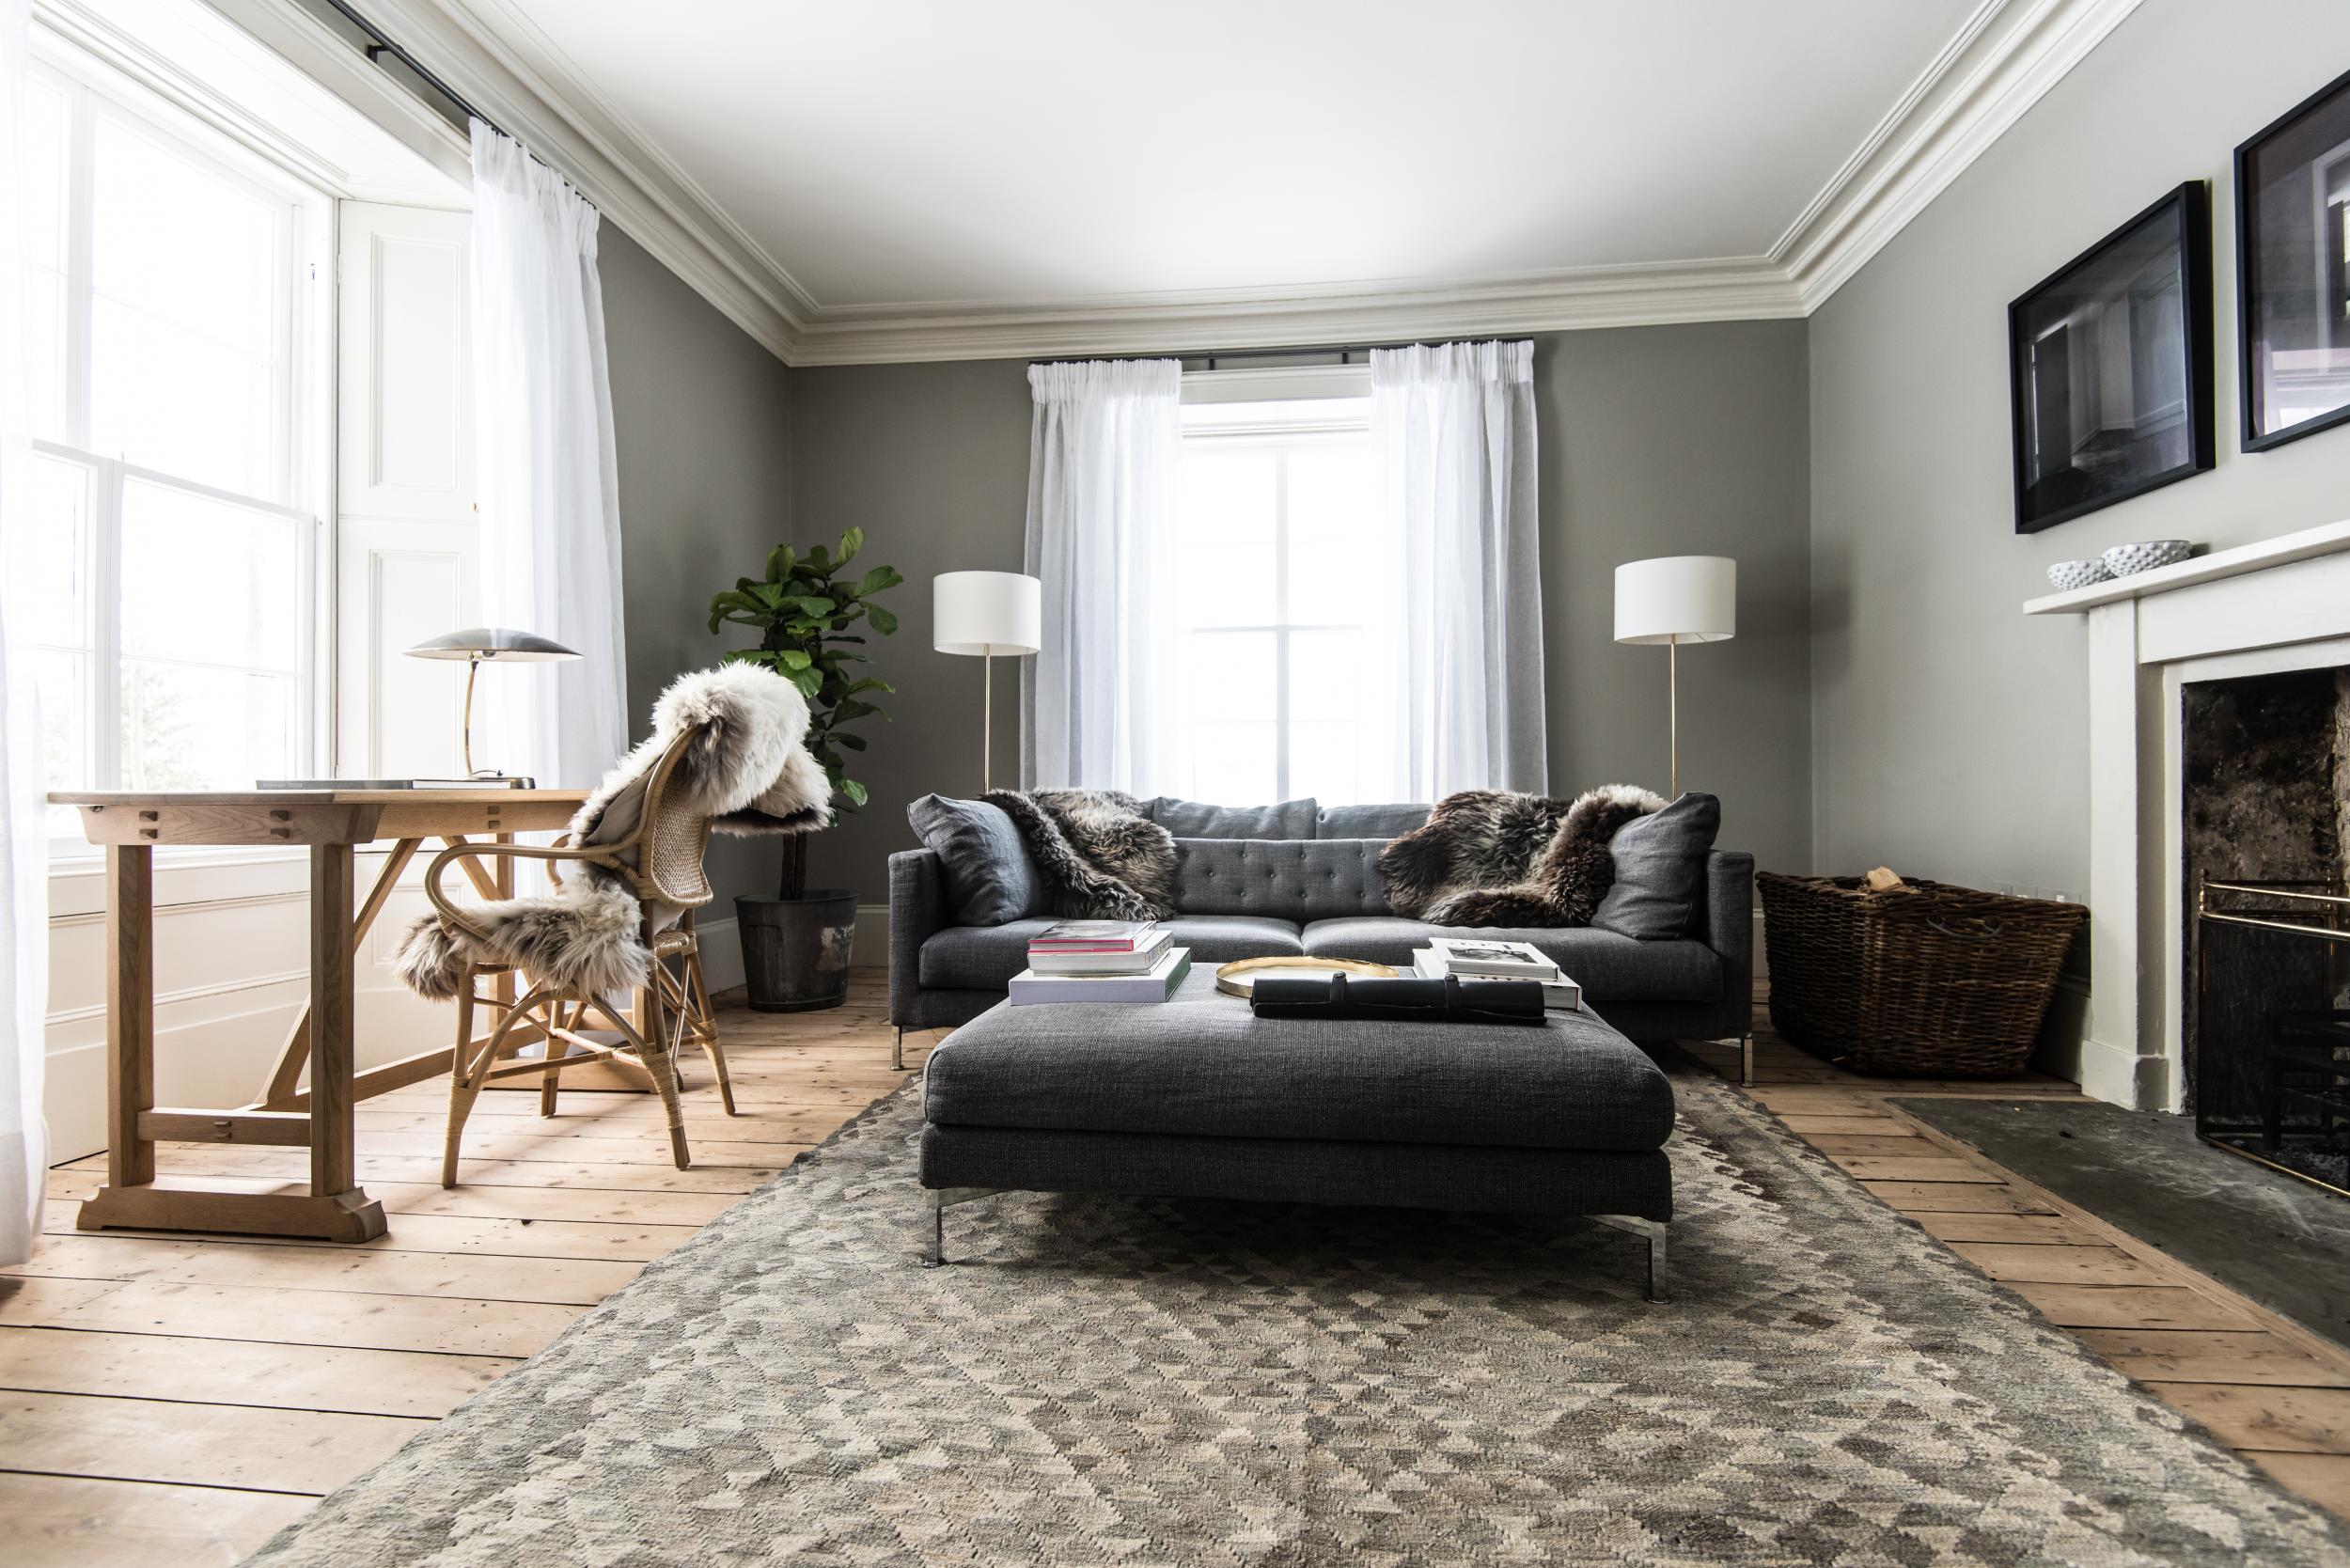 There's no tartan at Killiehuntly, with interiors instead rendered in simple but luxurious greys and taupes